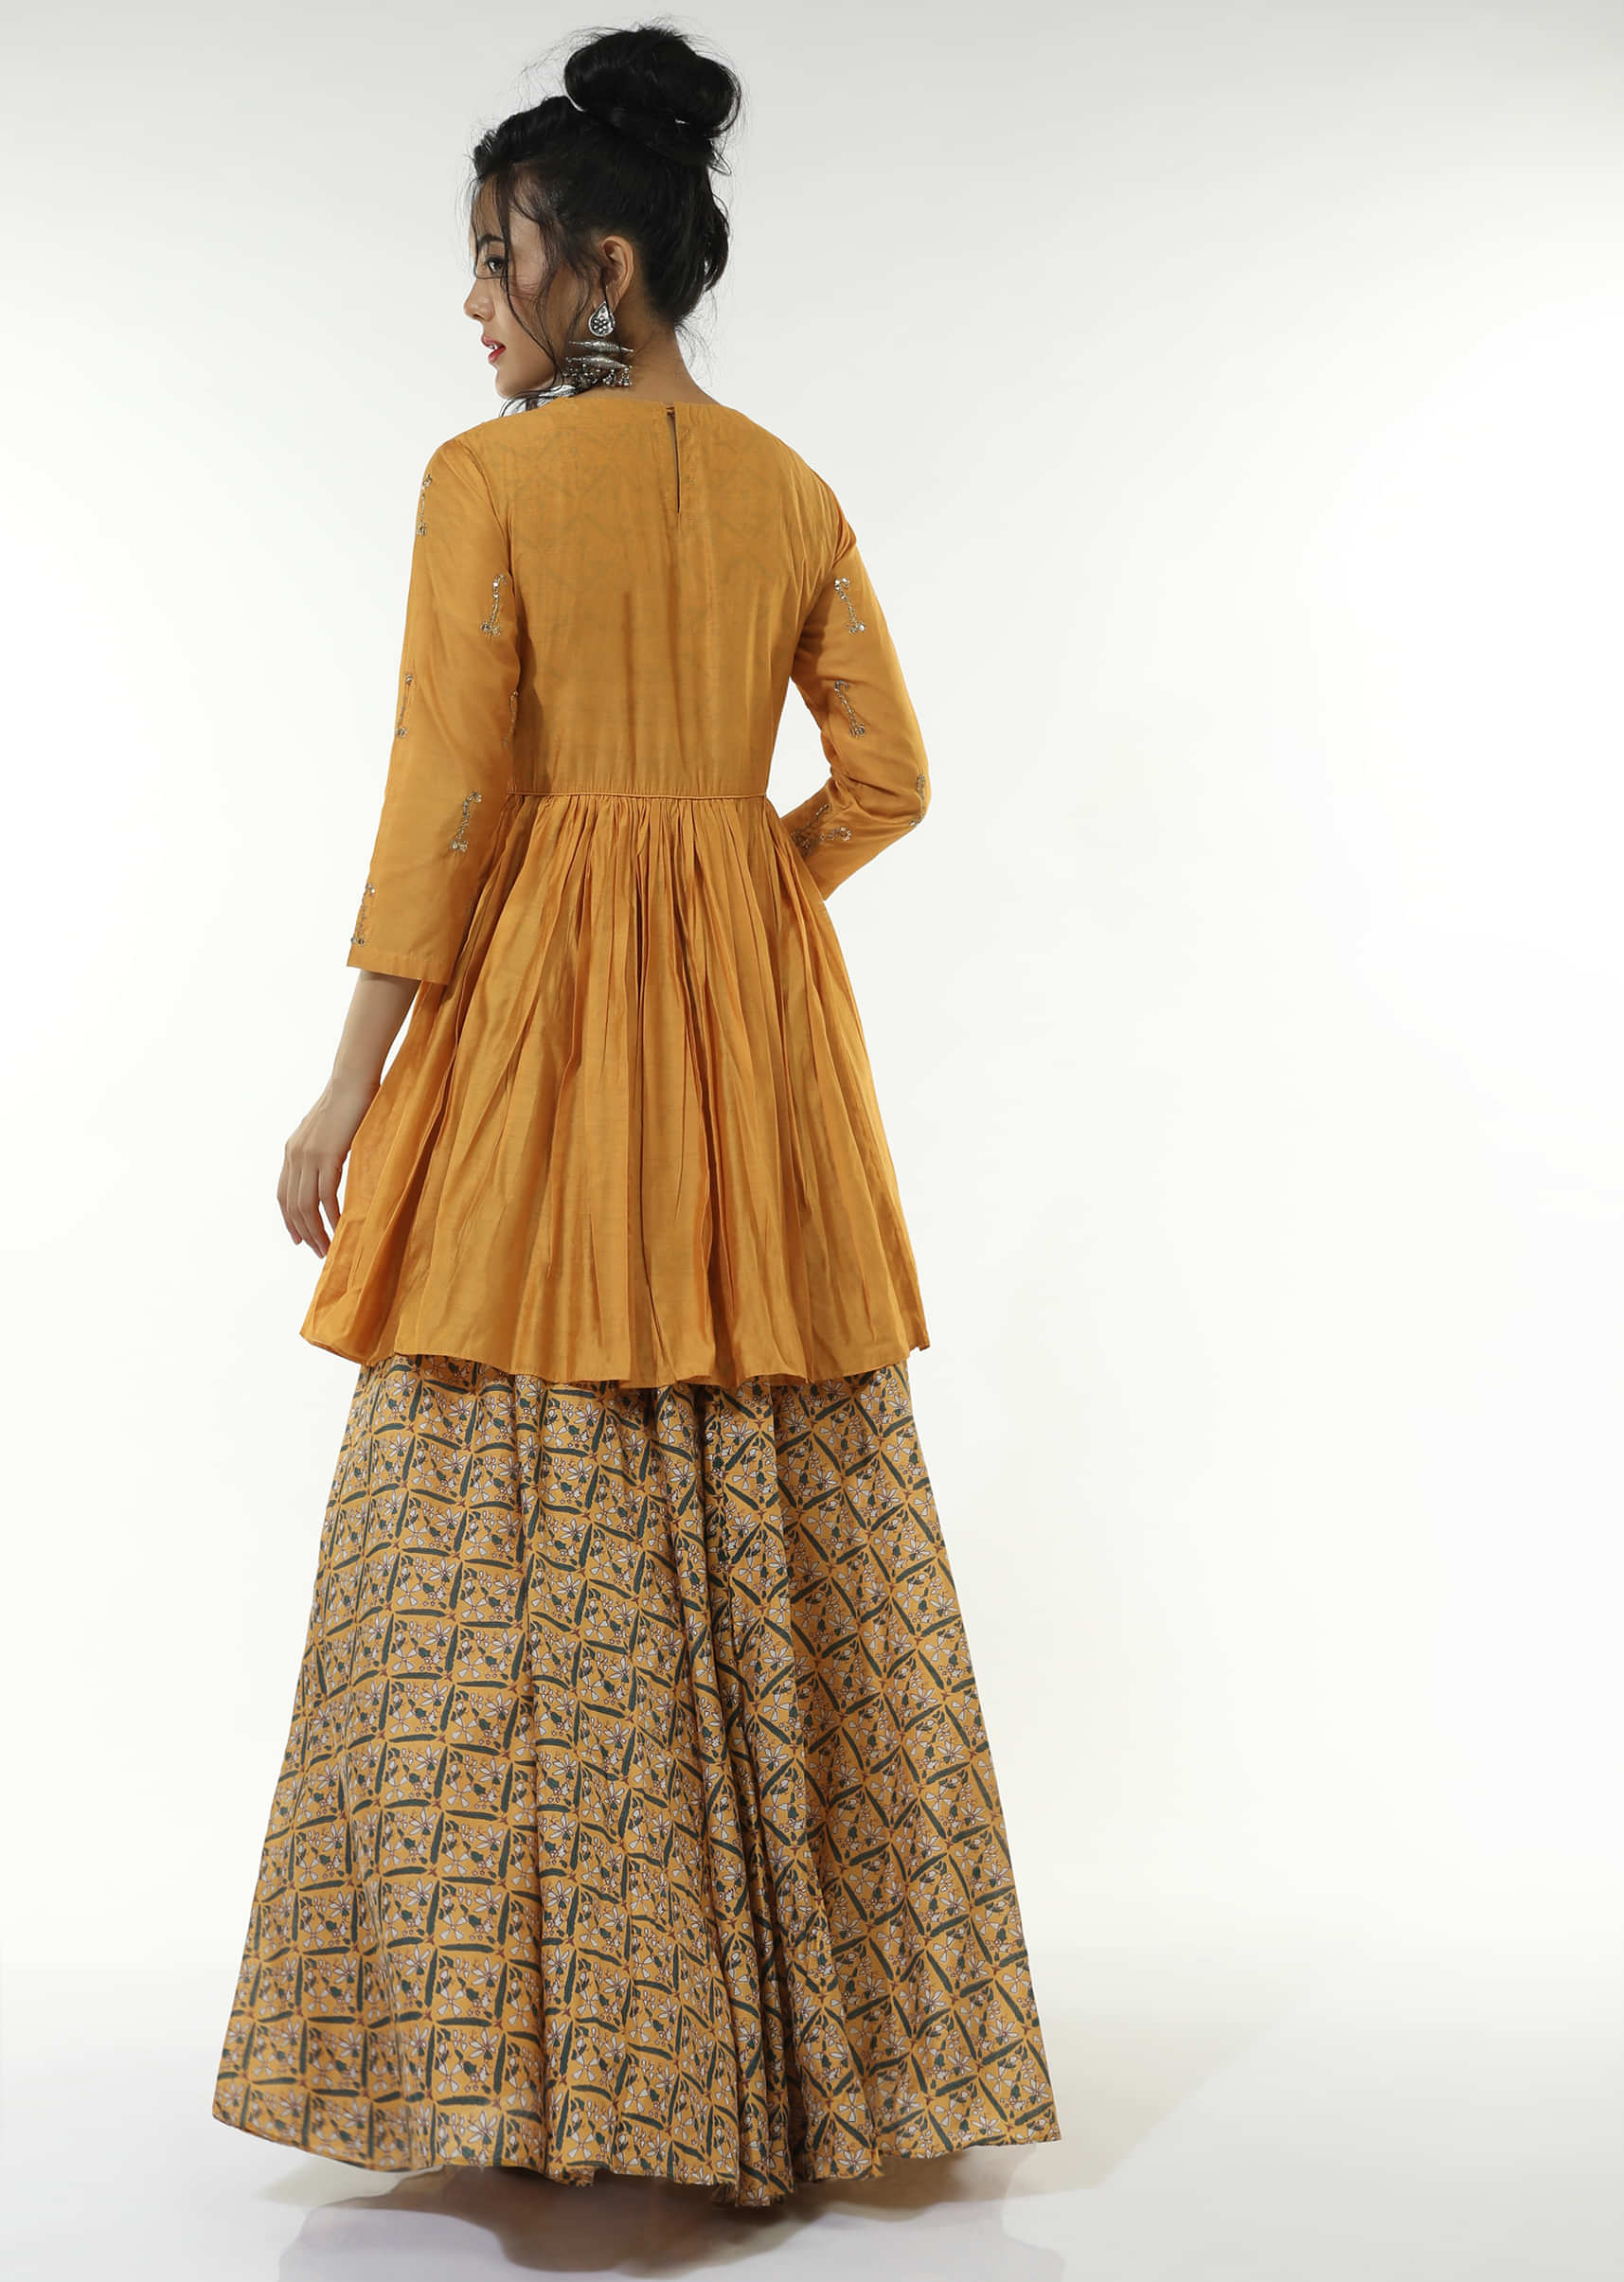 Mellow Yellow Long Dress With Floral Jaal Print And An Attached Peplum Jacket With Front Tie Up And Zari Work  